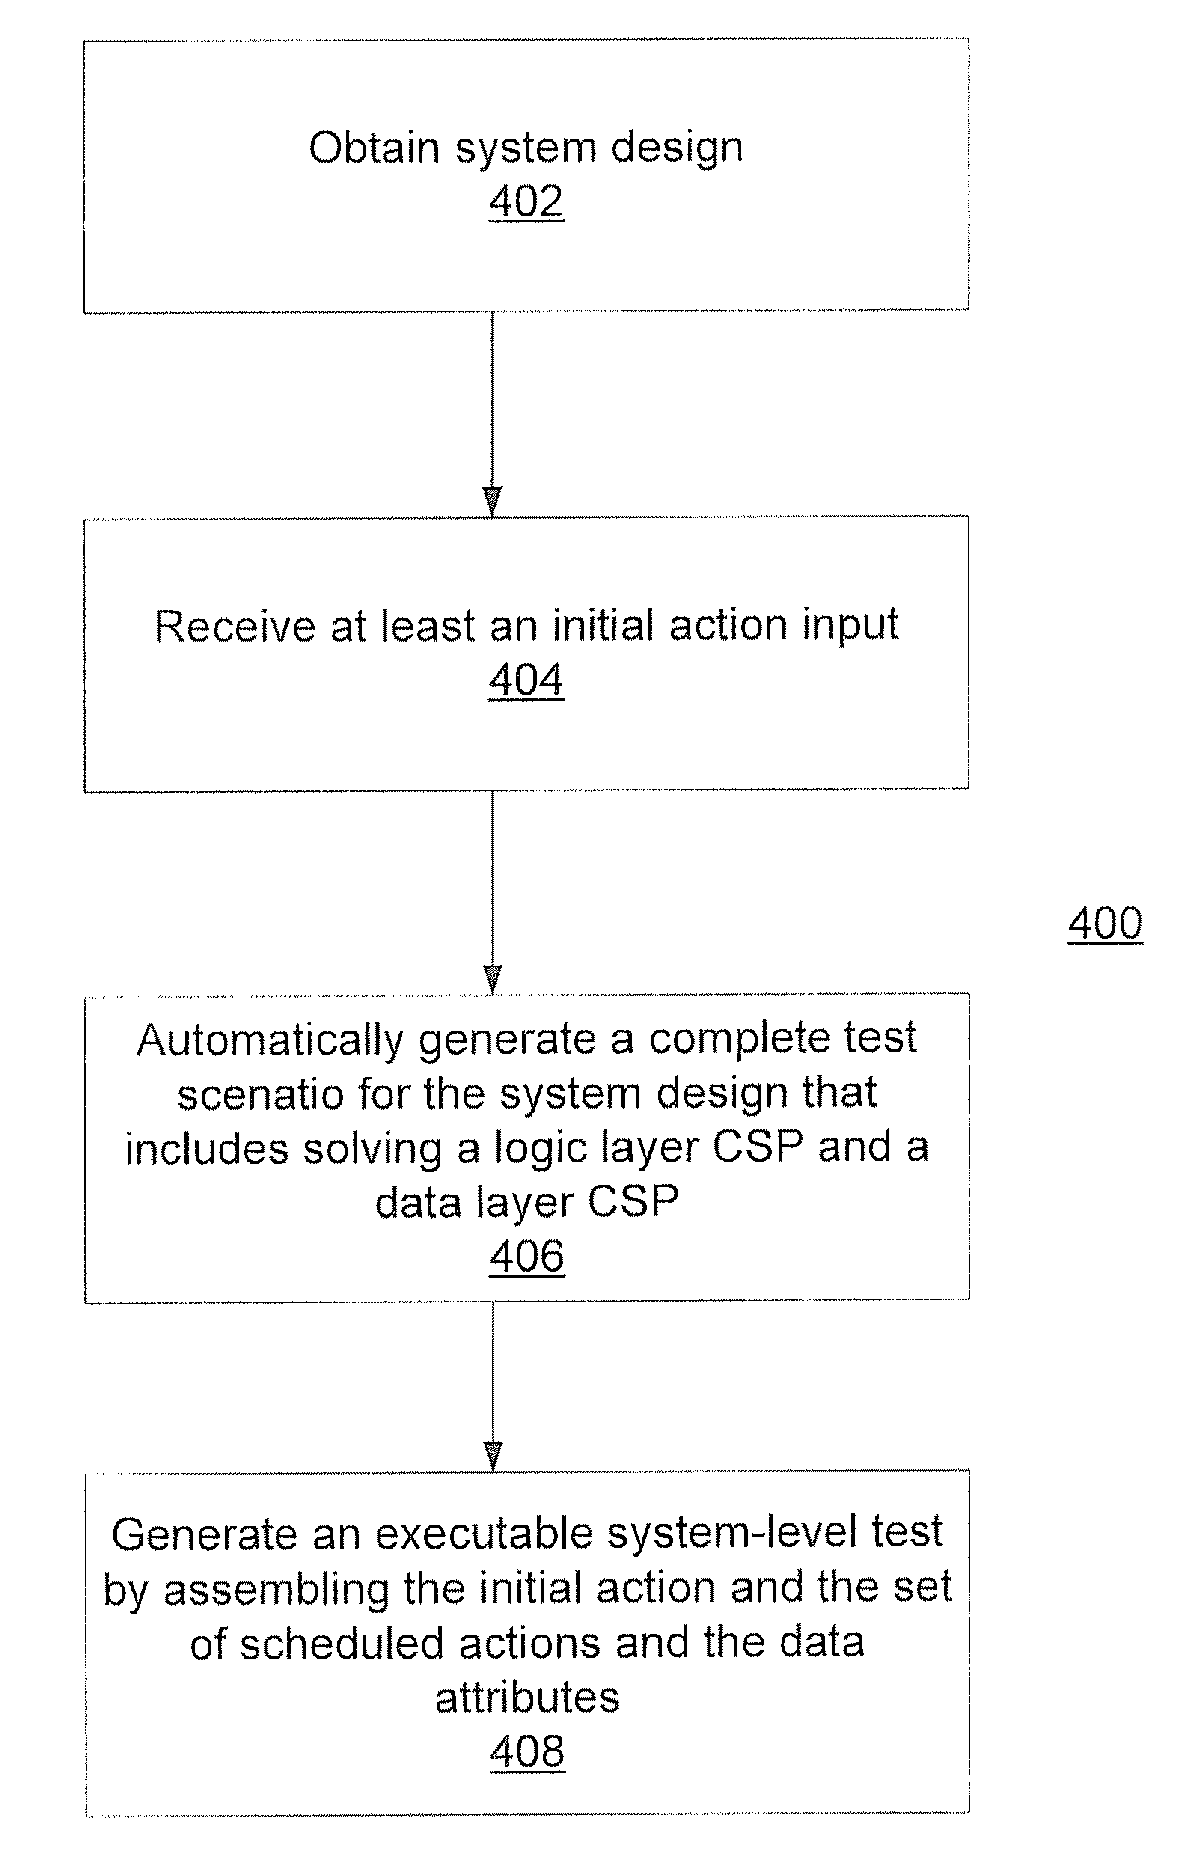 Method and system for automatically generating executable system-level tests